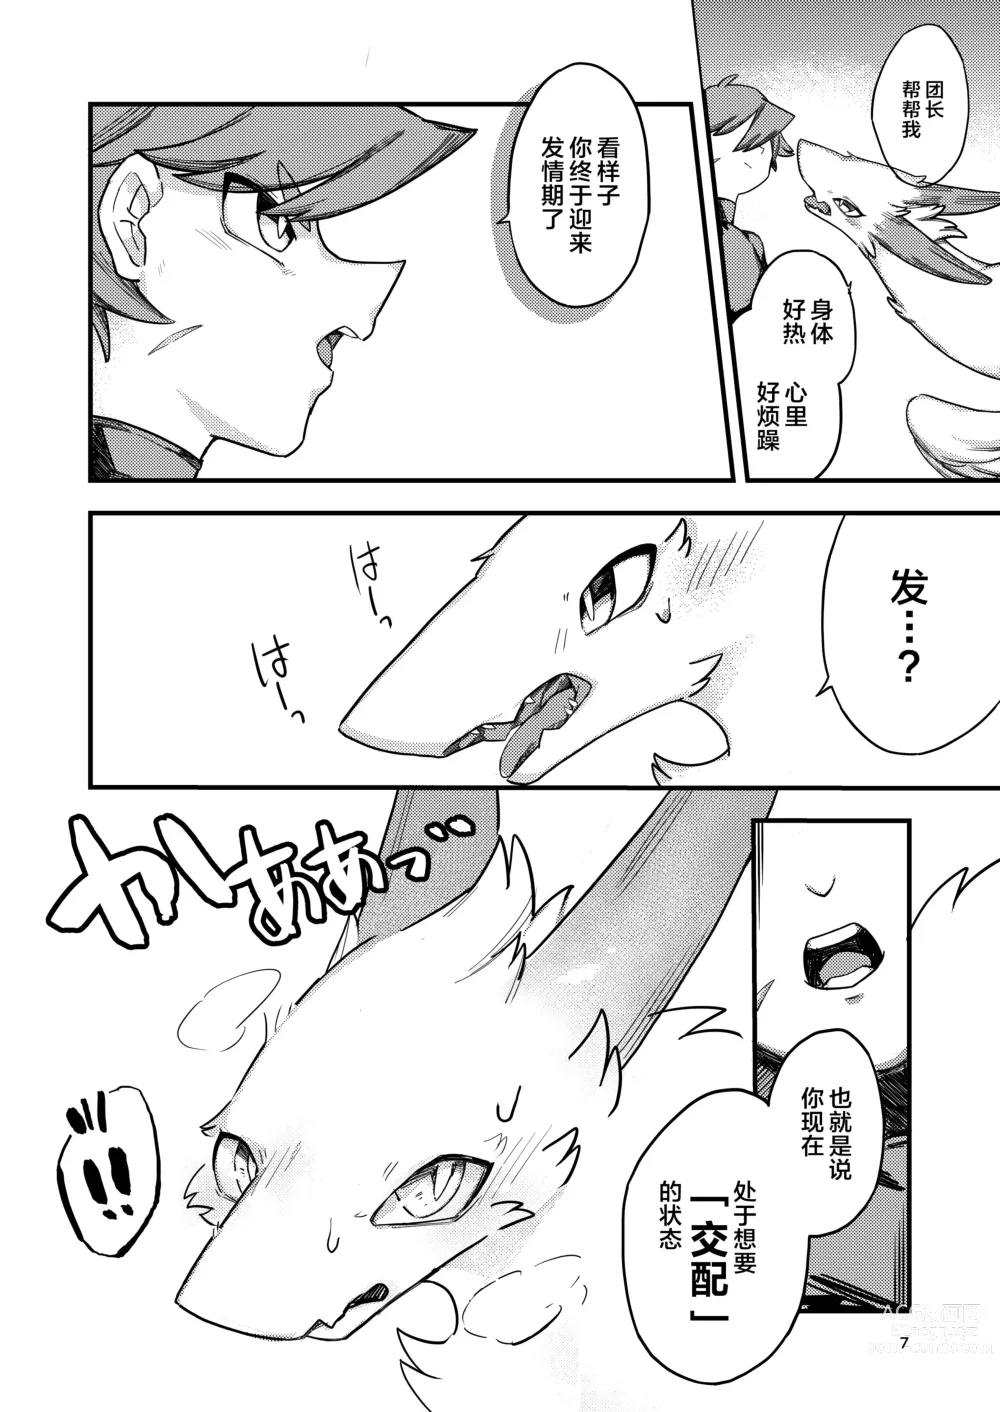 Page 5 of doujinshi 第一次的发情期